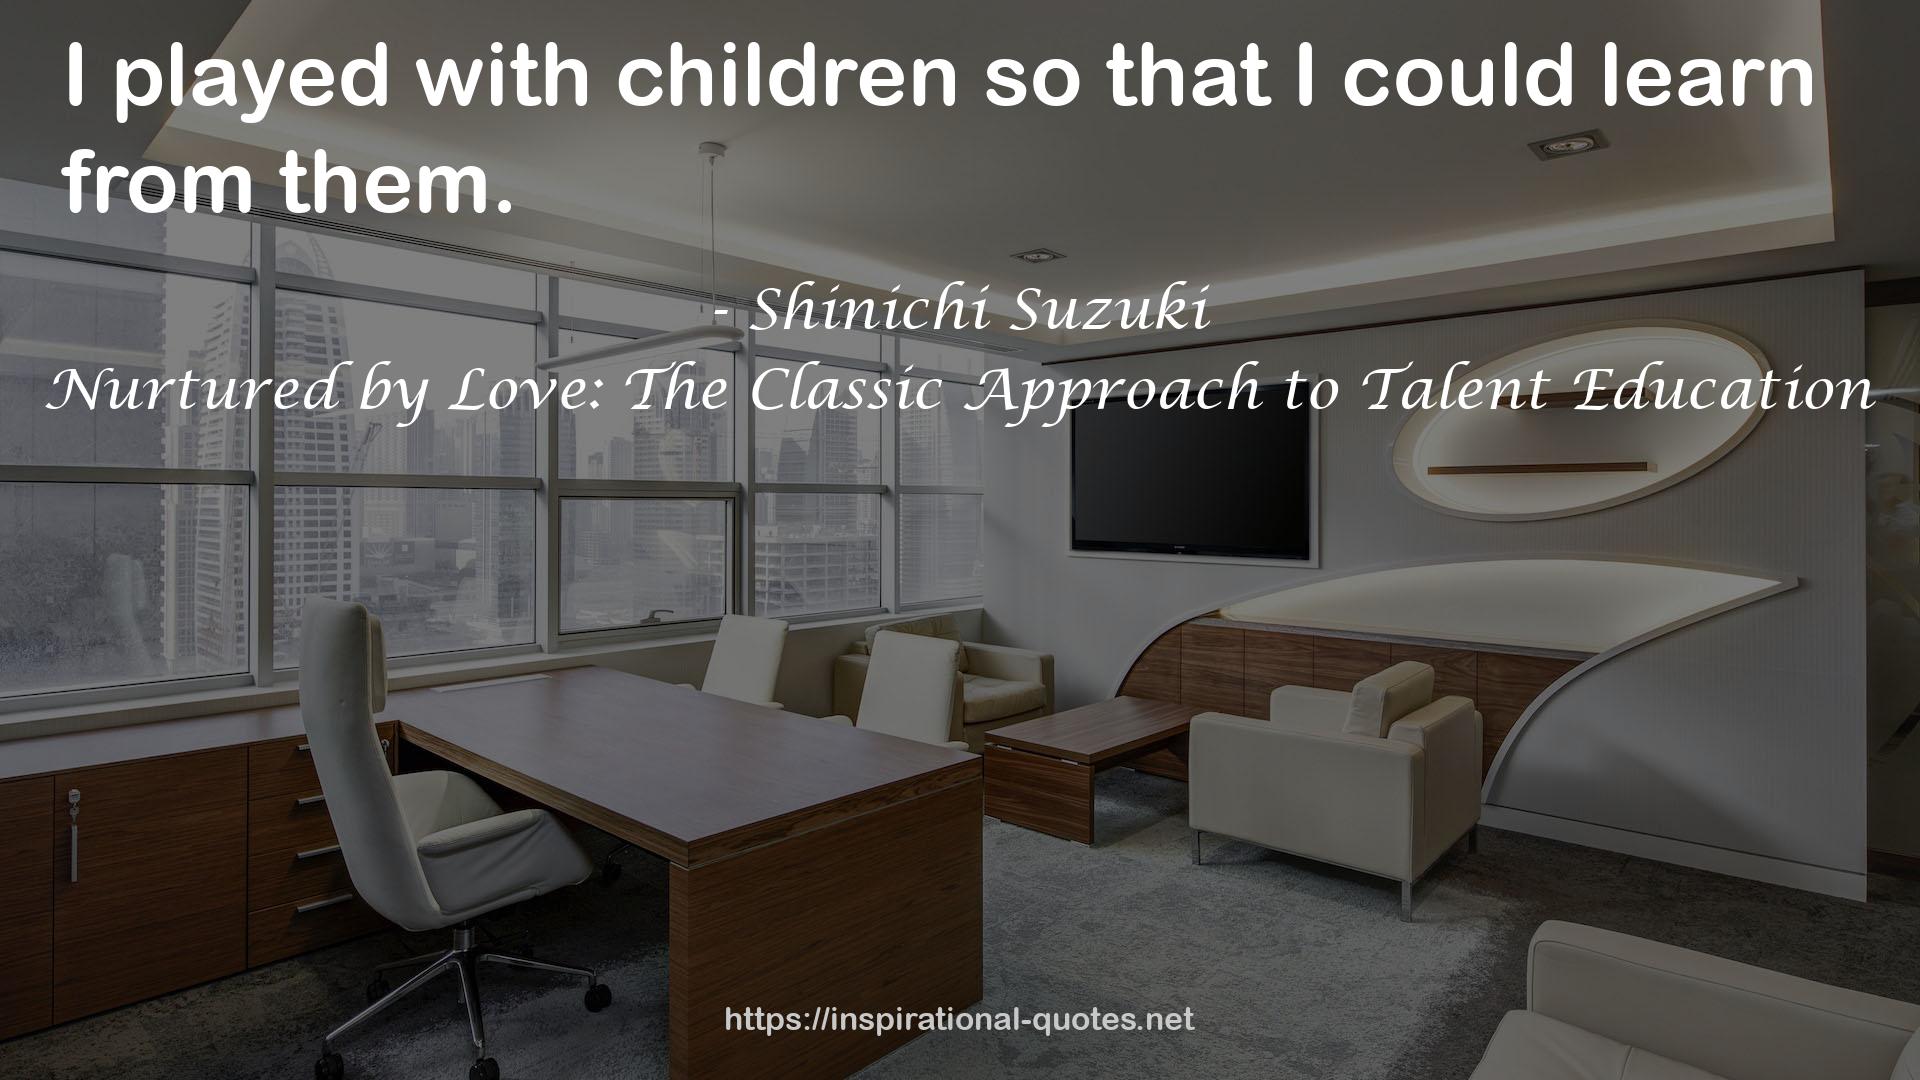 Nurtured by Love: The Classic Approach to Talent Education QUOTES